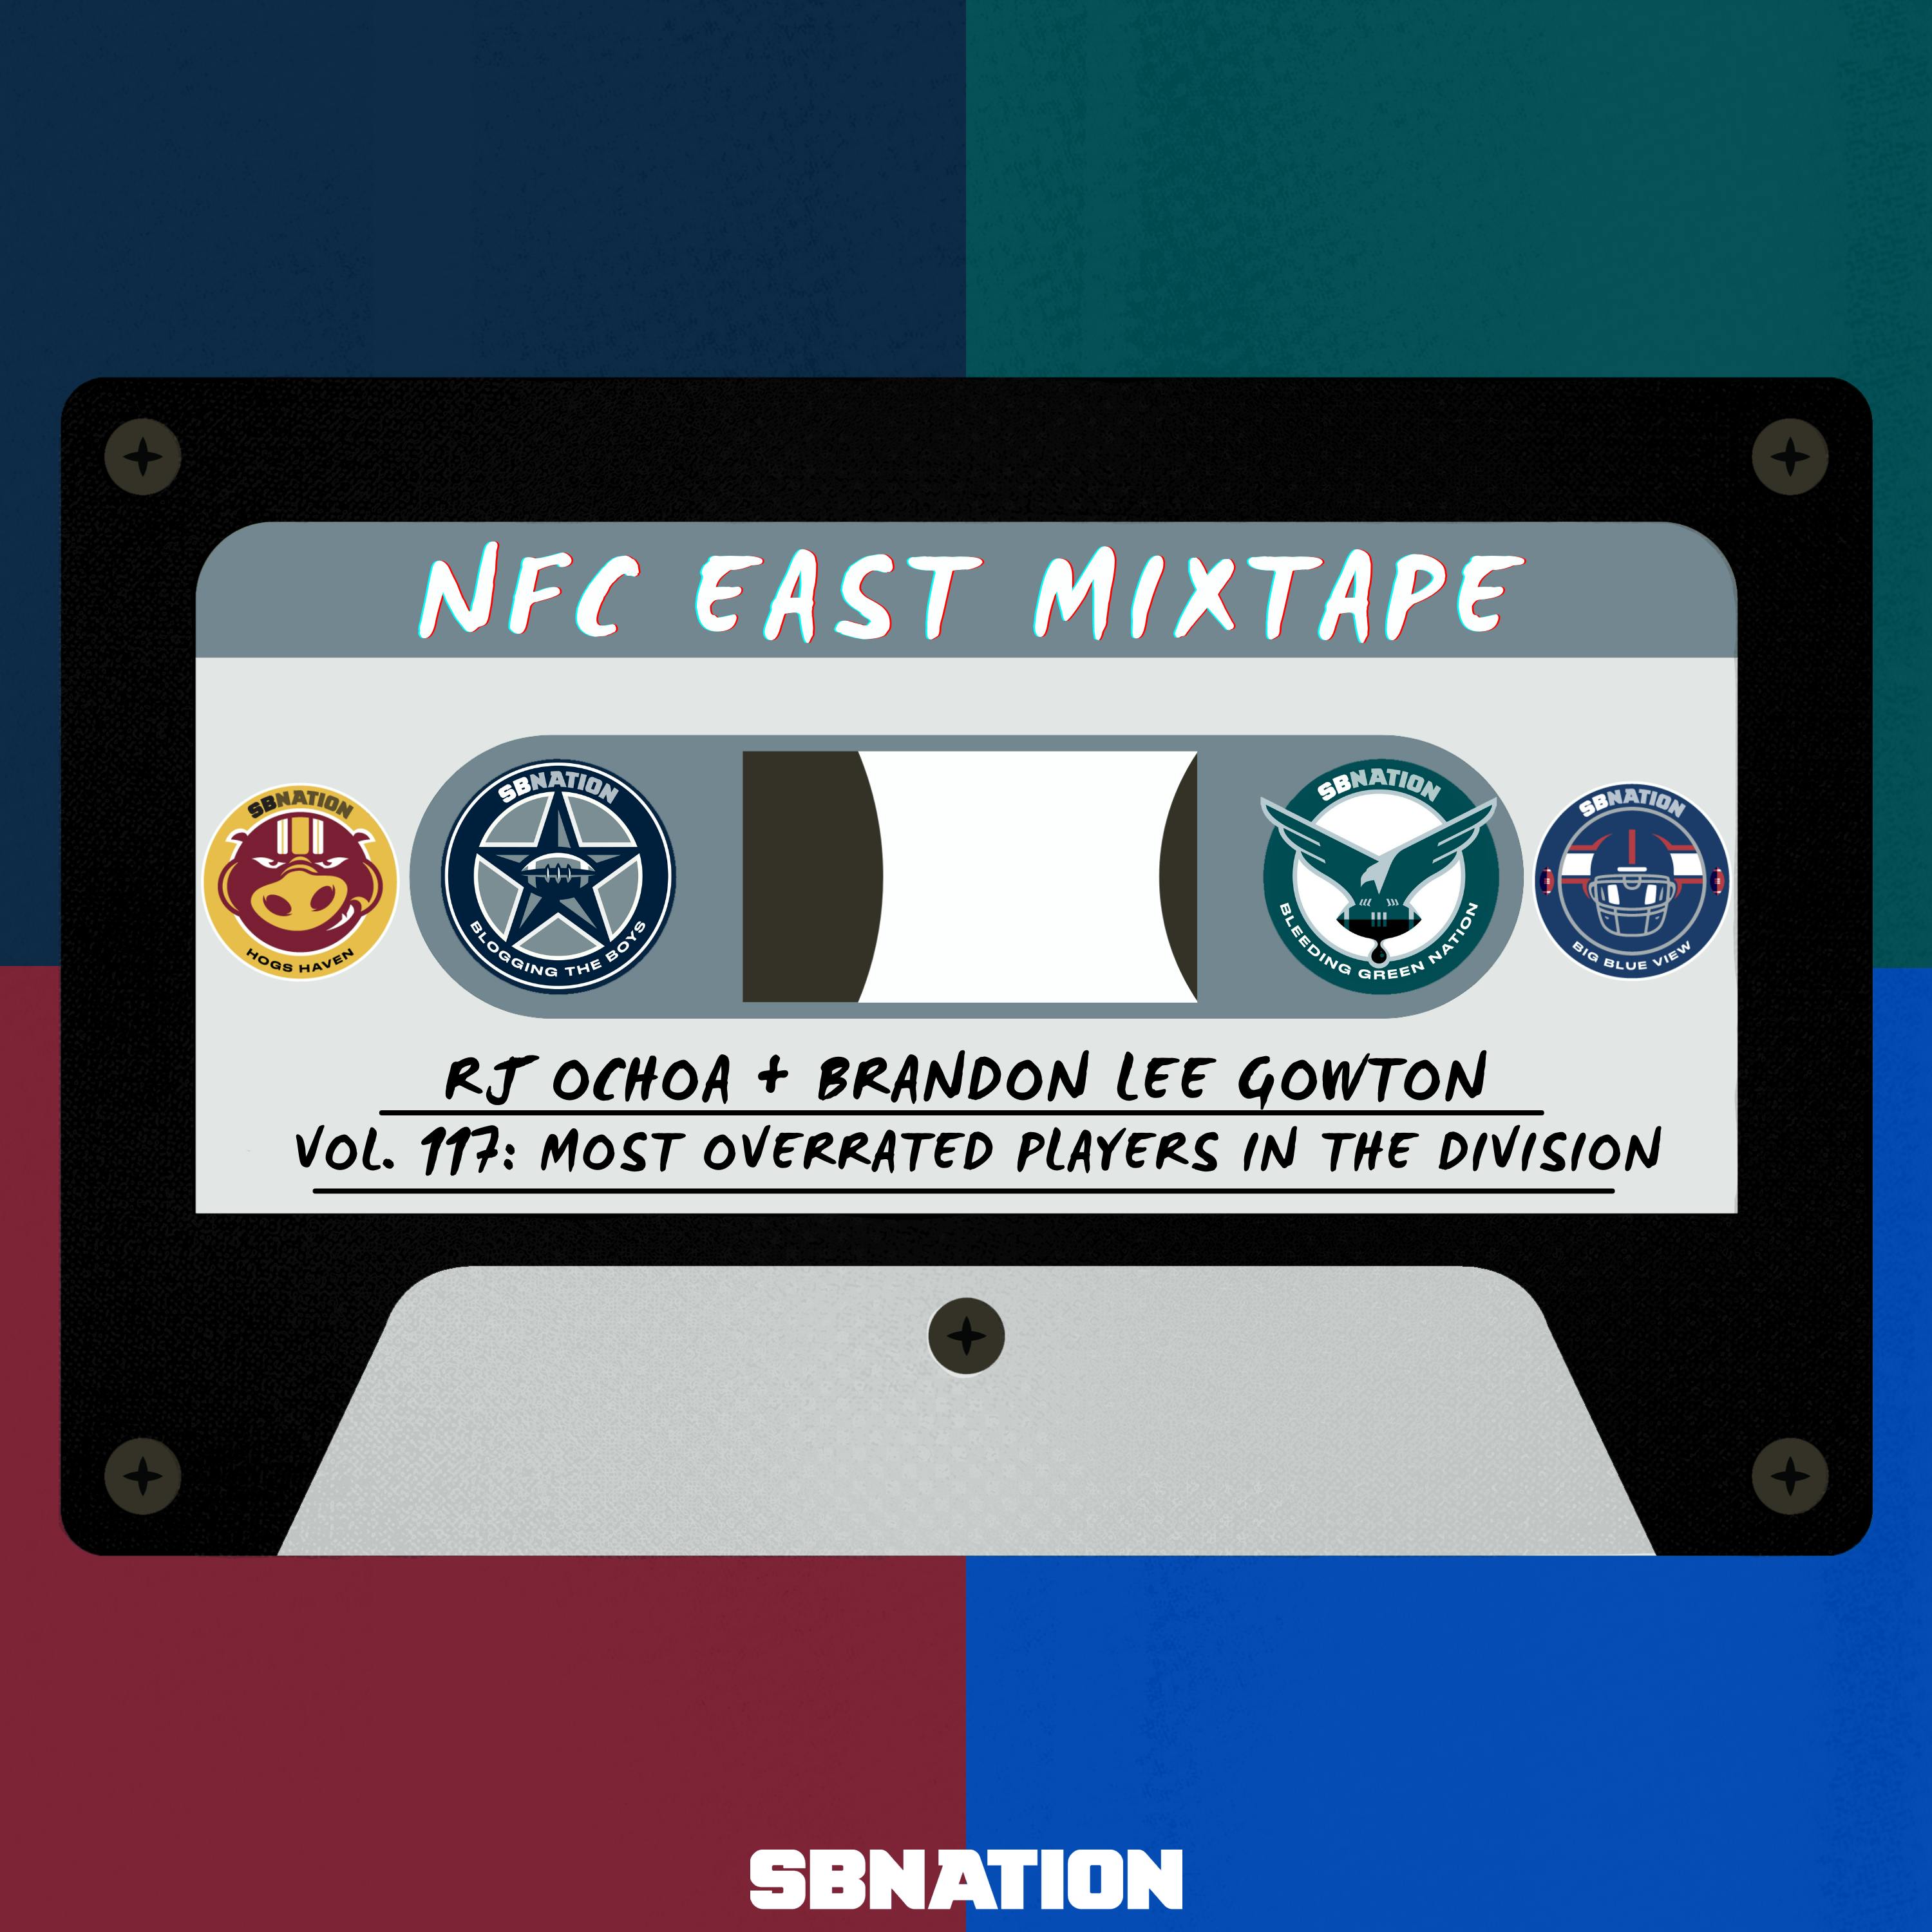 NFC East Mixtape Vol. 117: Most overrated players in the division